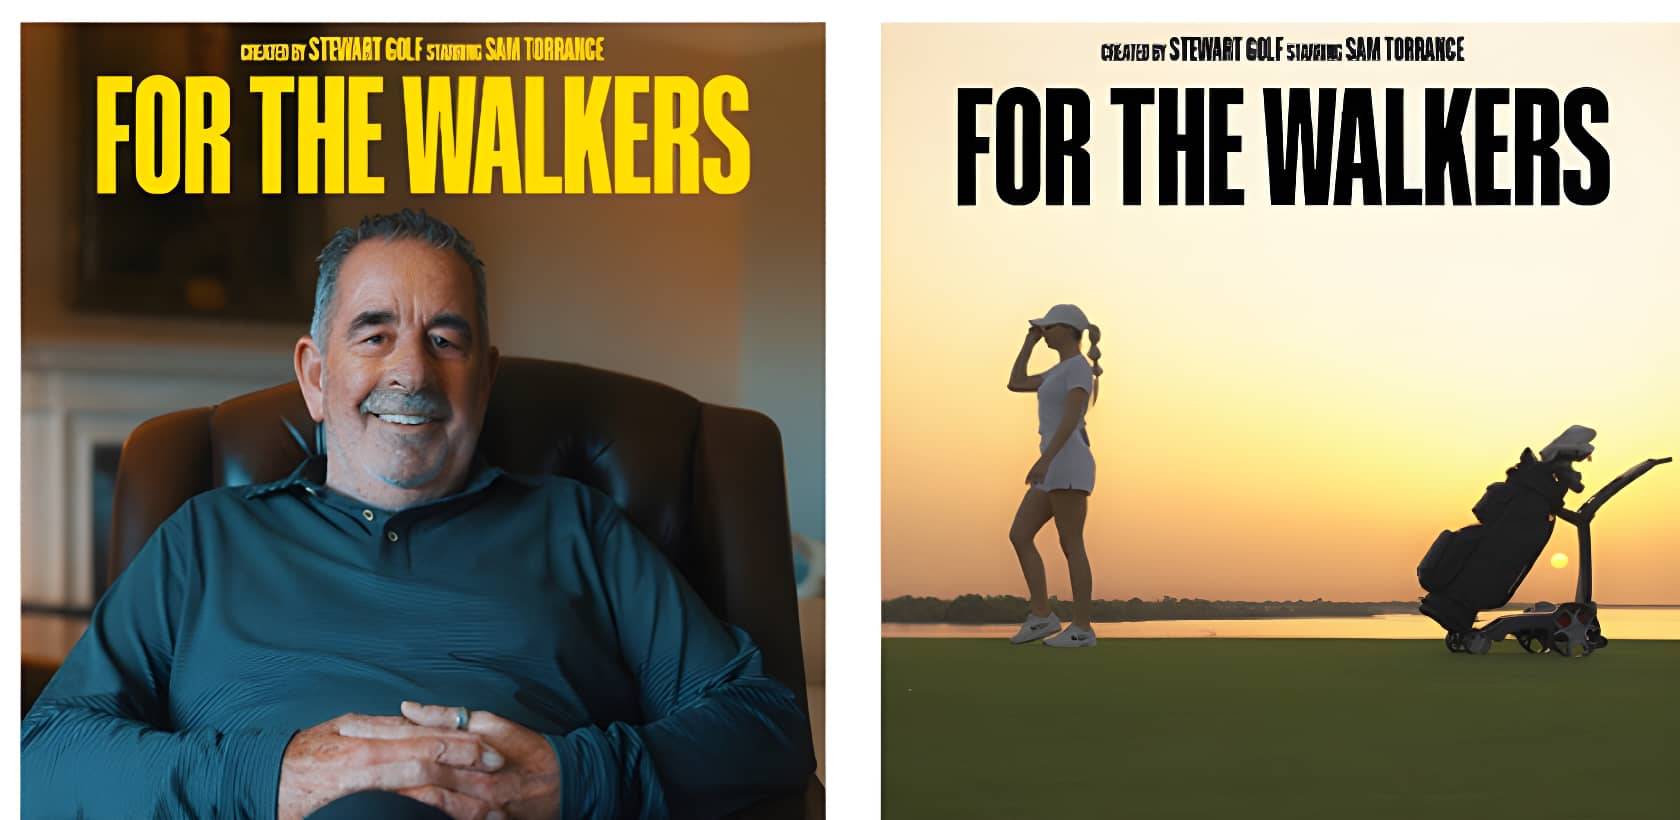 Stewart_Golf_For_The_Walkers